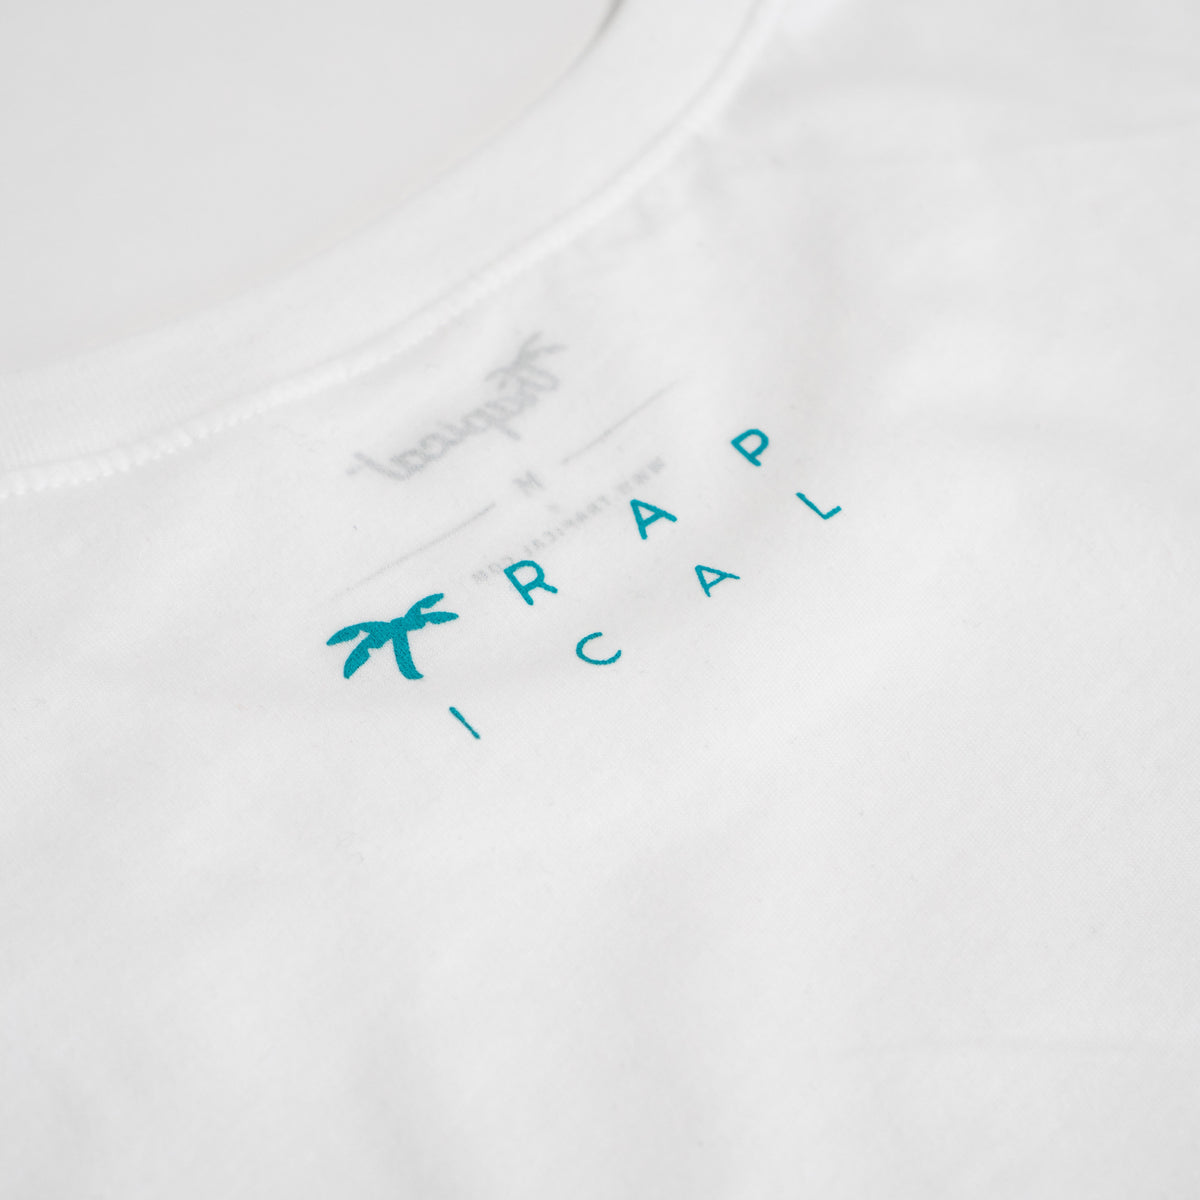 Men’s Muscle white - Trapical